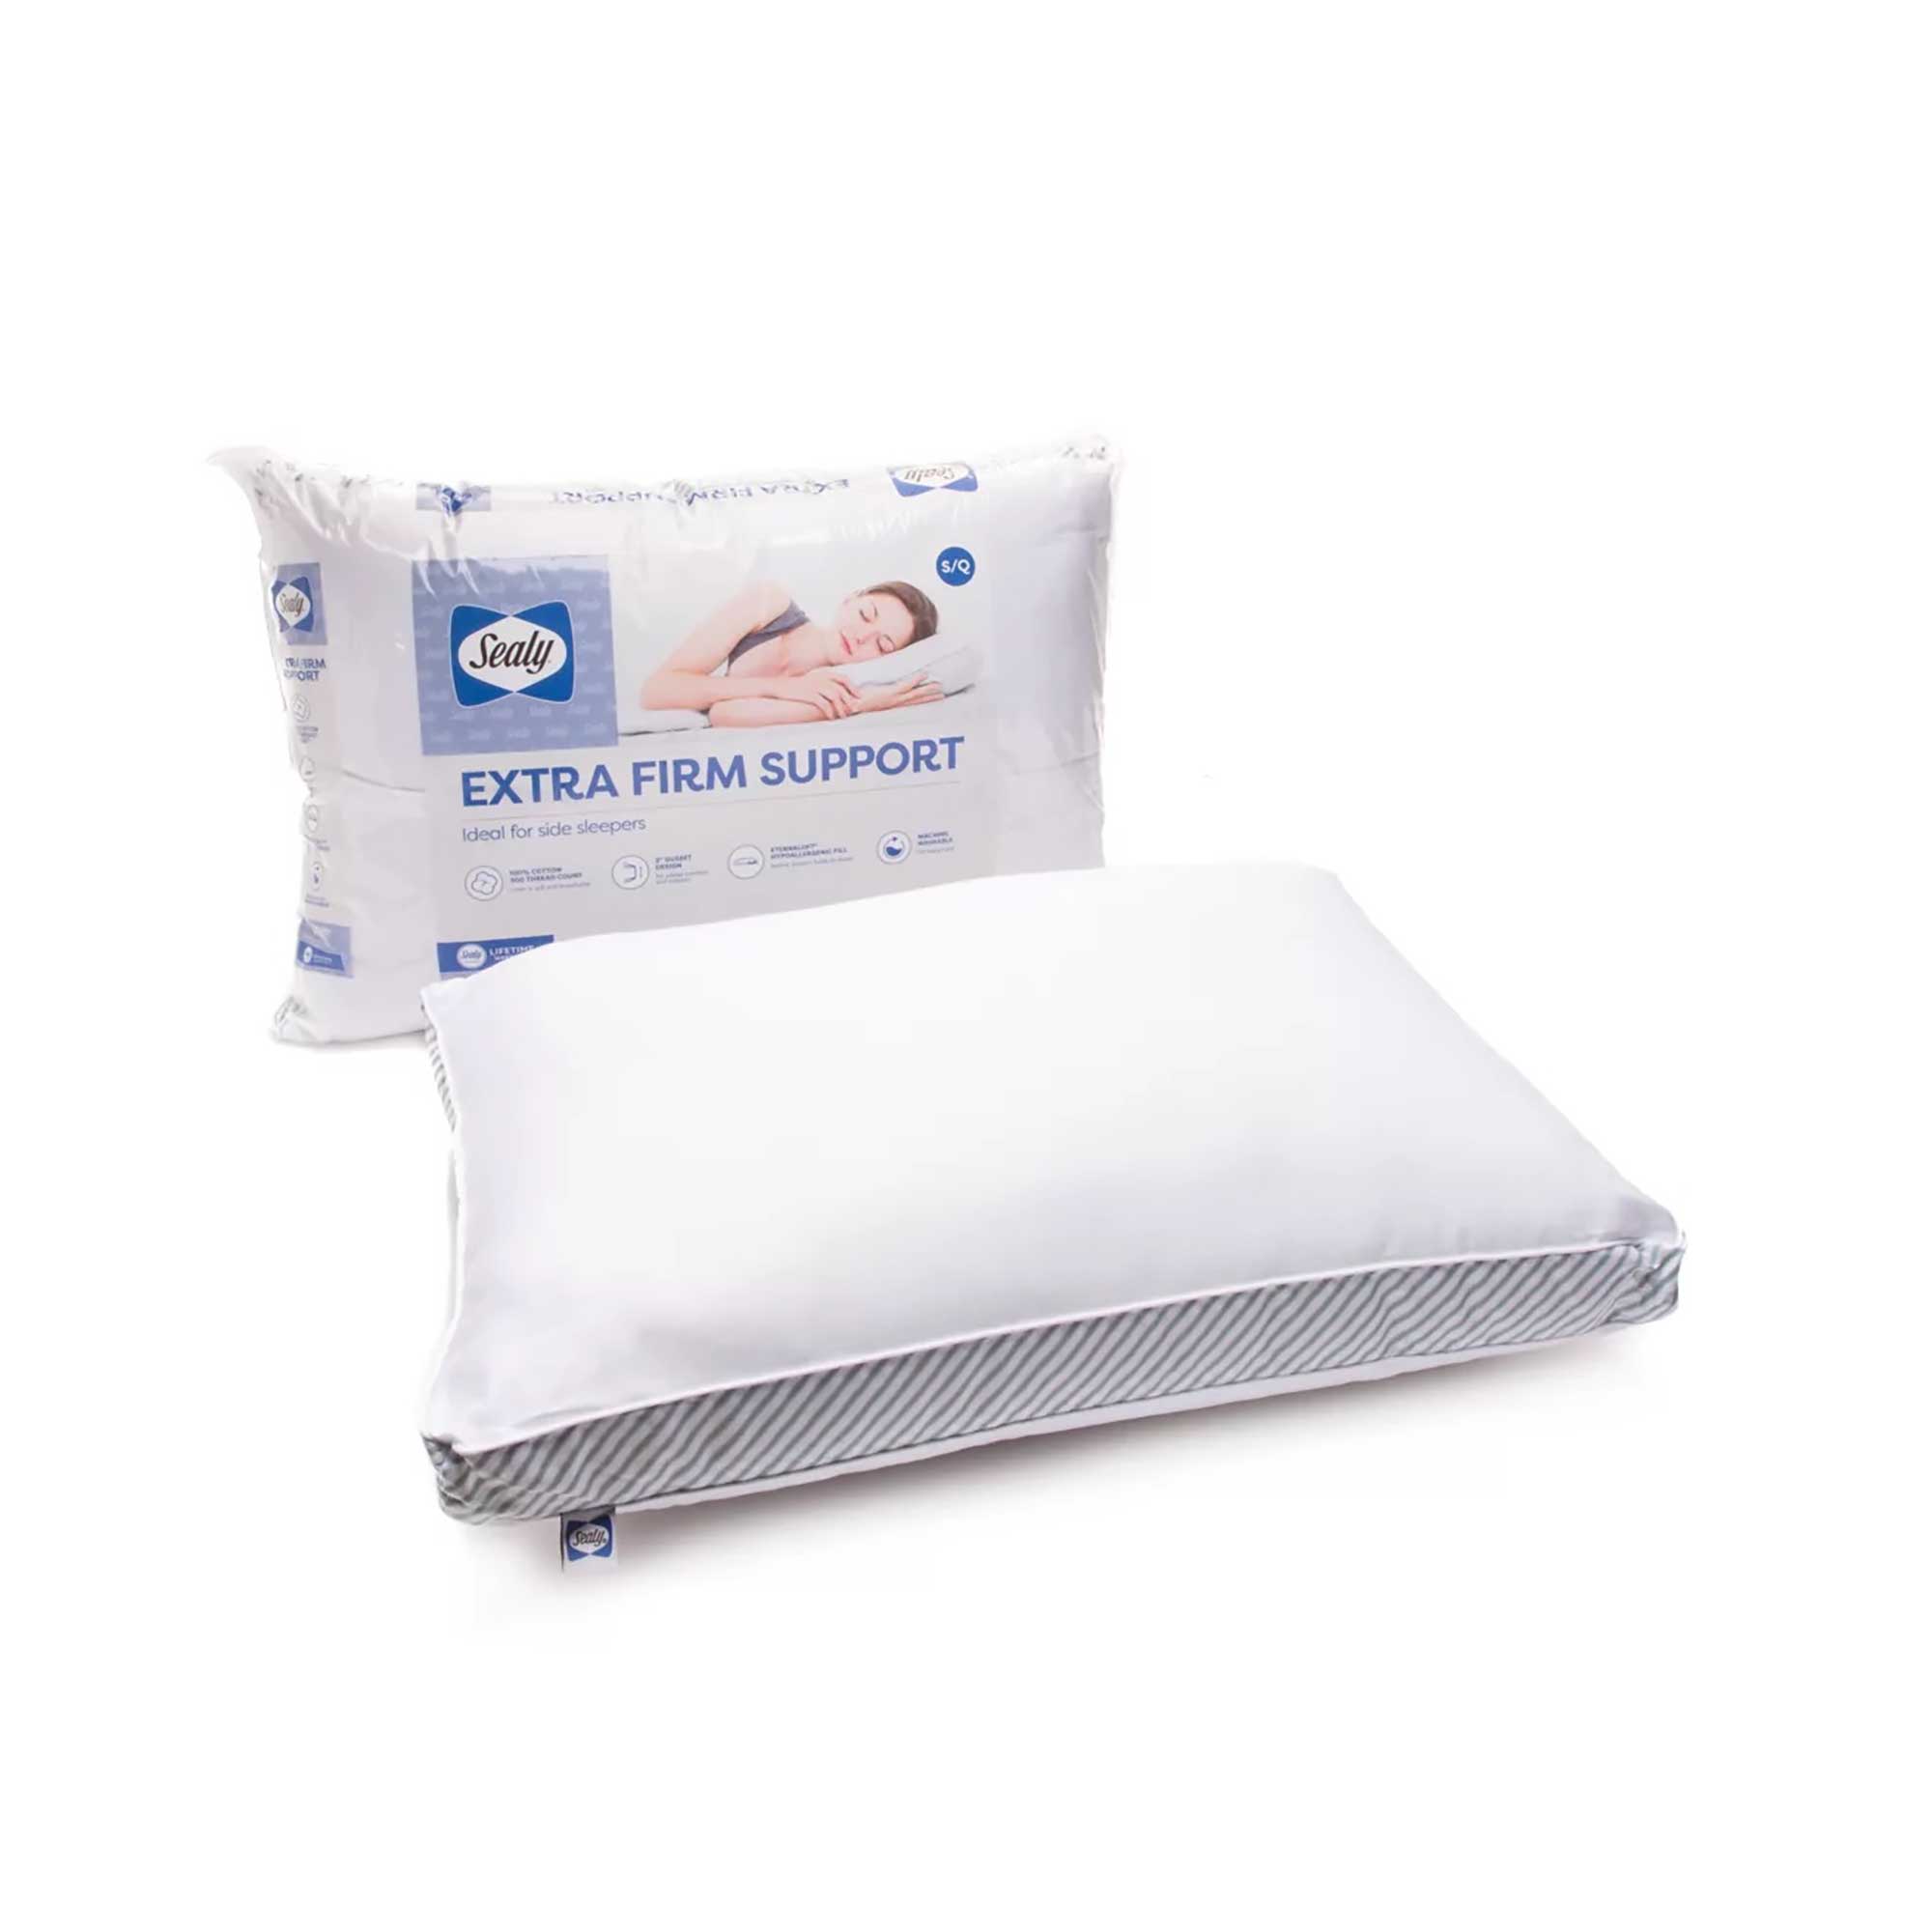 Sealy Extra Firm Support Pillow 枕頭 (平行進口)